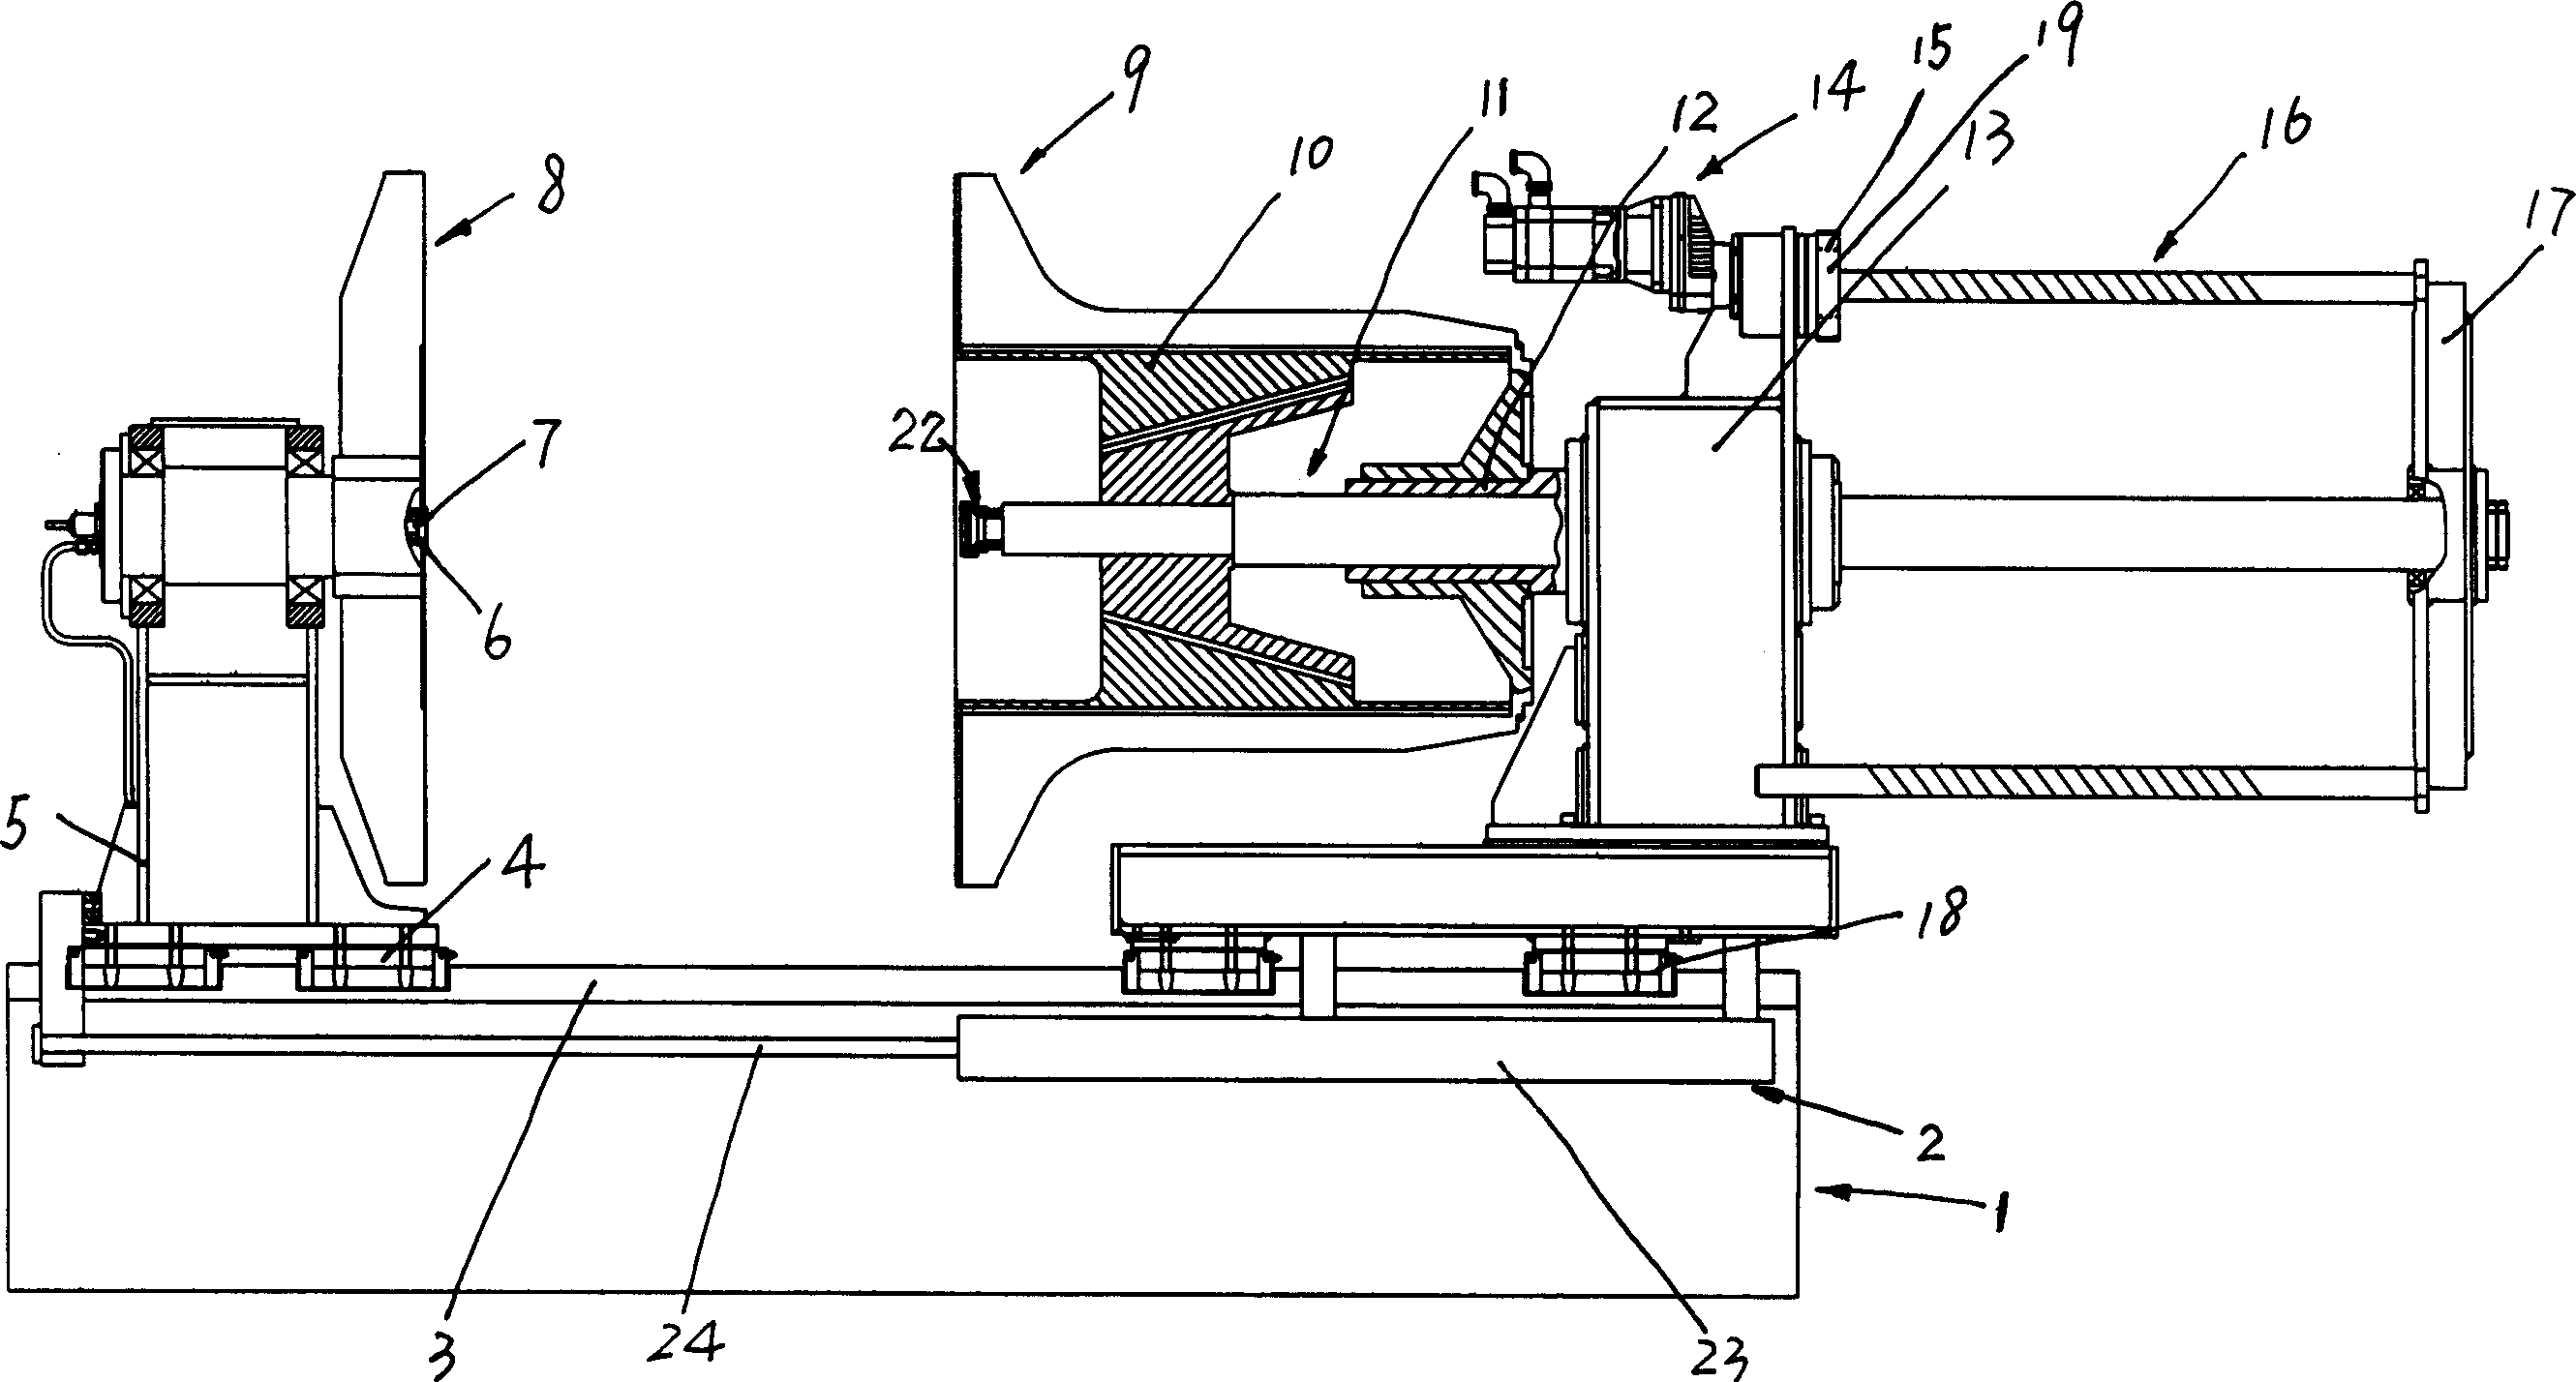 Coiling apparatus of re-spooling machine